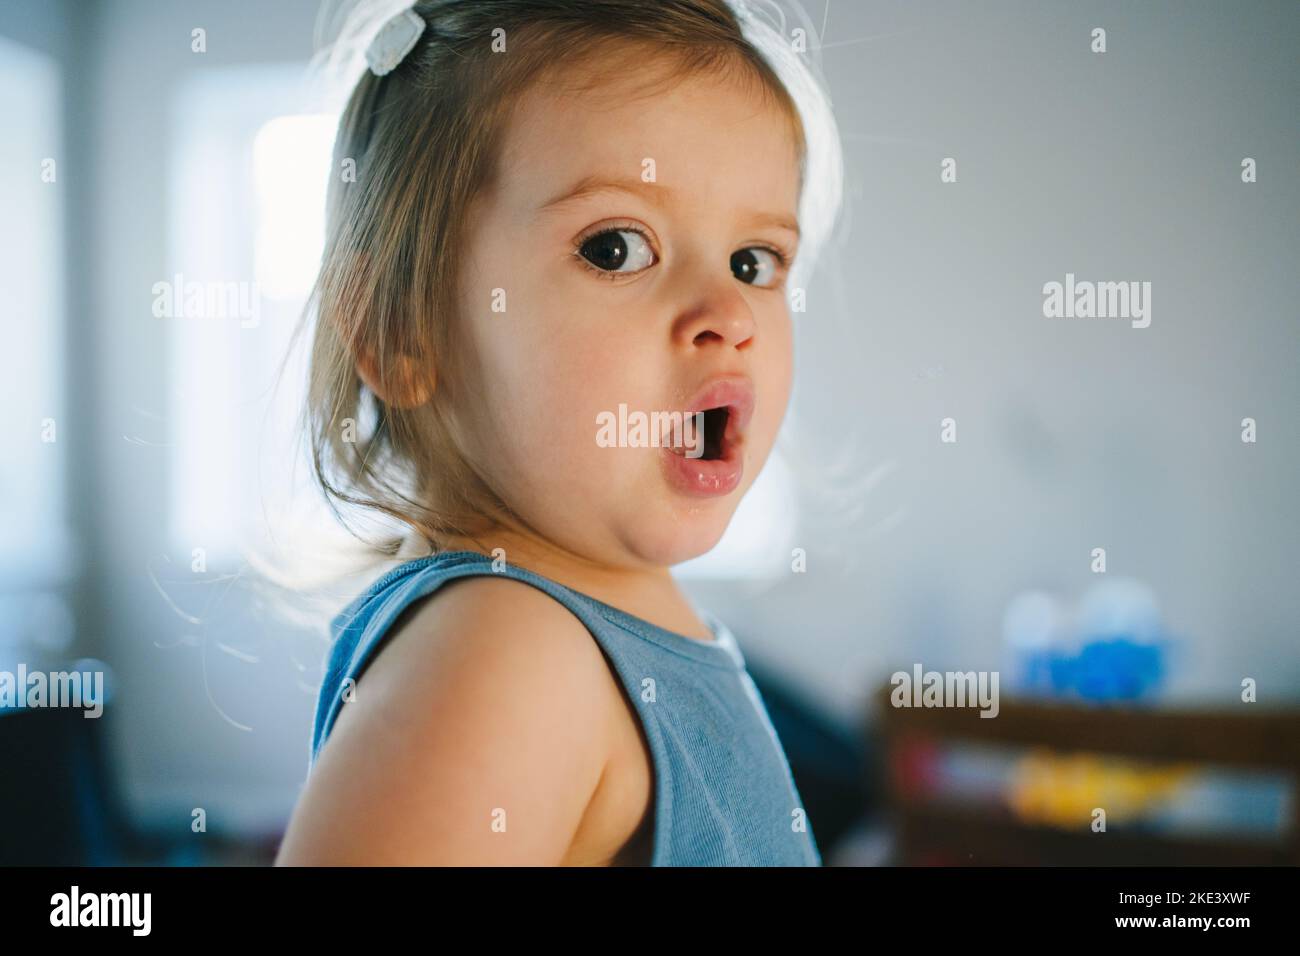 The portrait of a girl who just woke up, yawning and looking at the camera. Family concept. Closeup portrait. People emotion portrait concept. Stock Photo